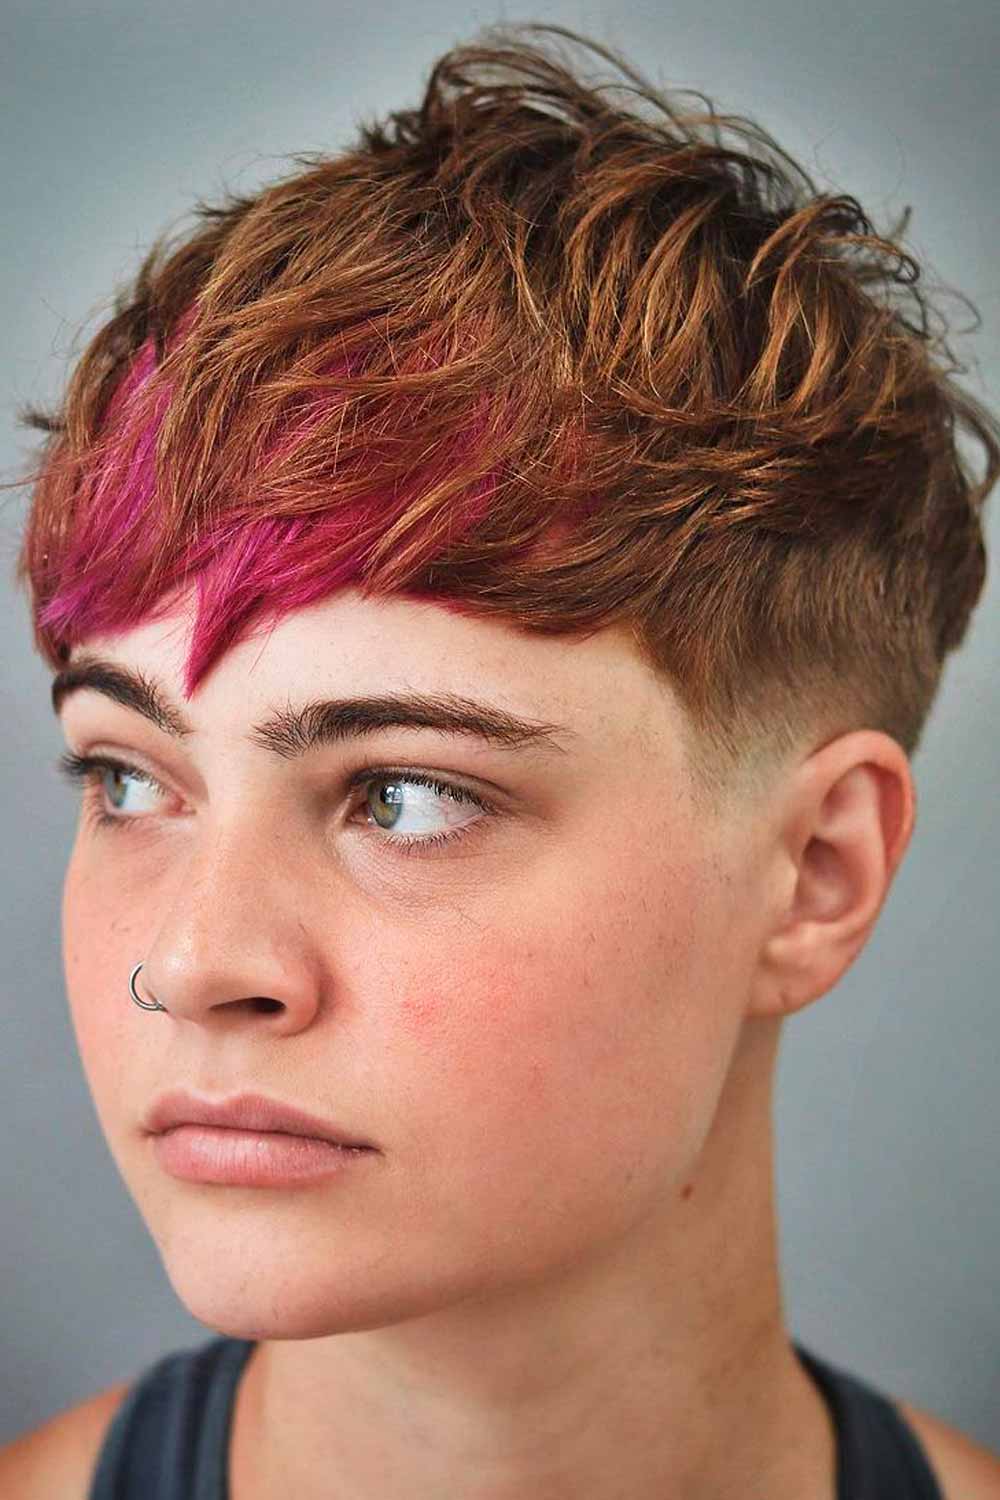 Low Tapered Skin Fade #androgynoushaircuts #androgynoushairstyles